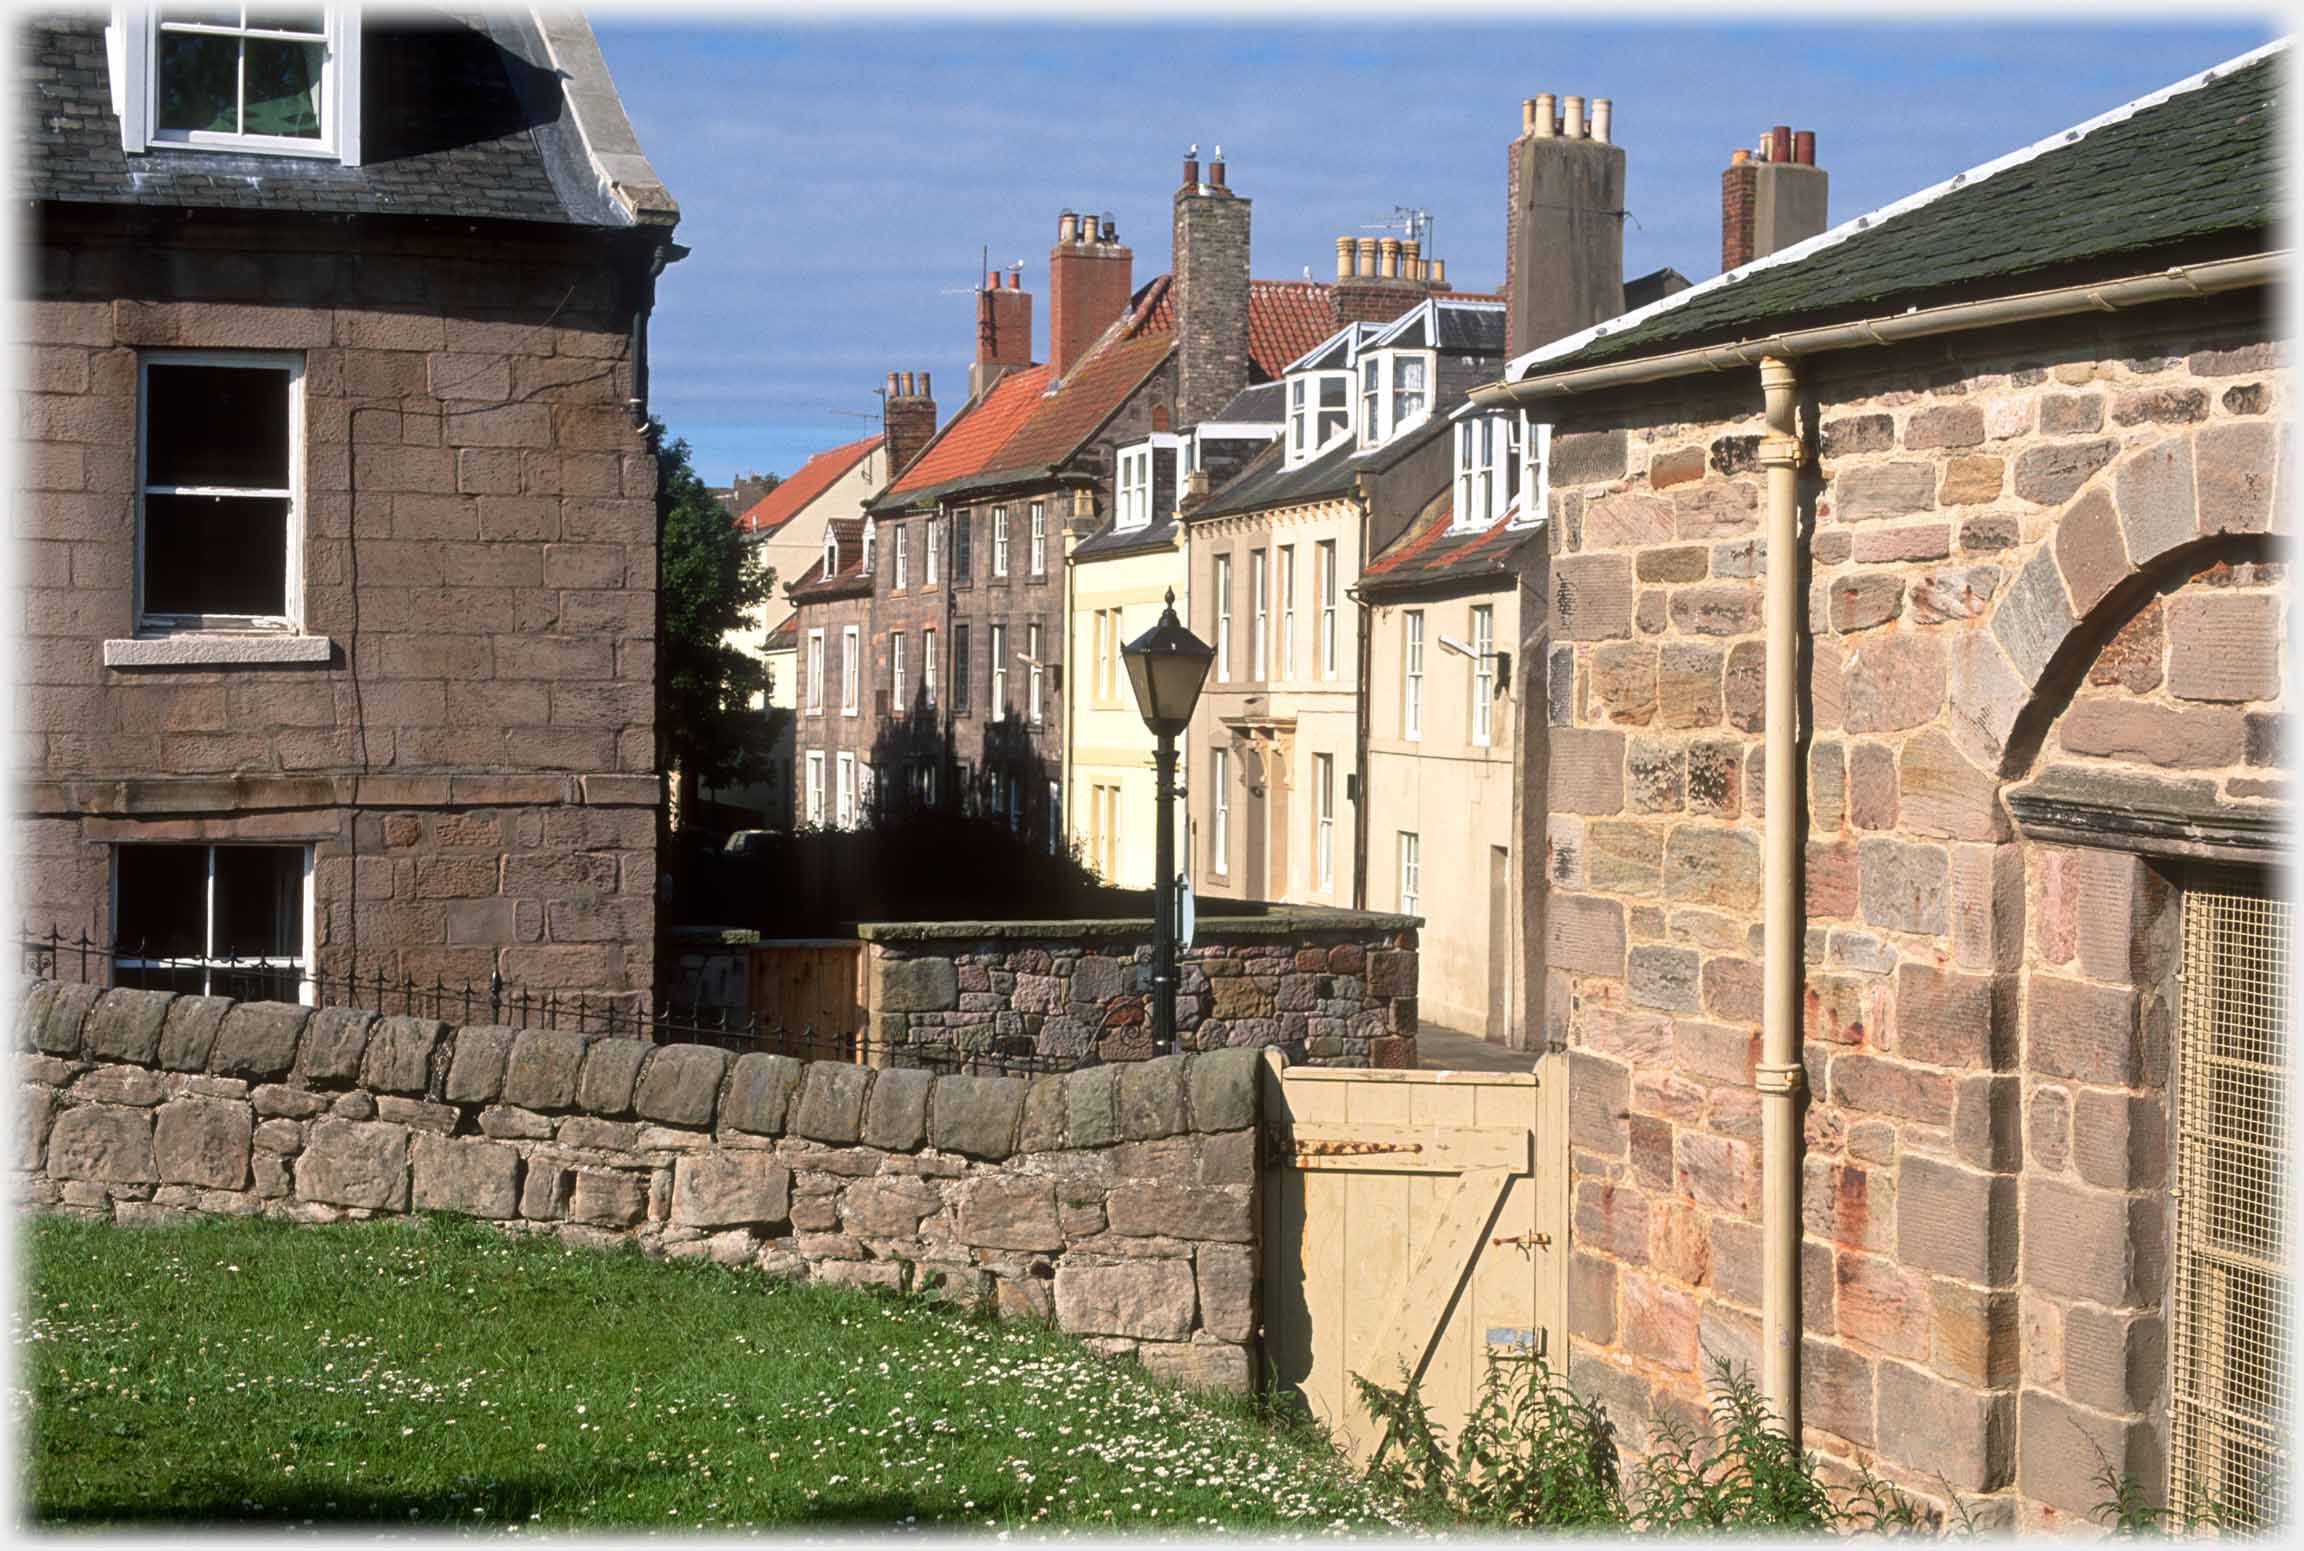 Looking between two buildings over two walls at row of houses.